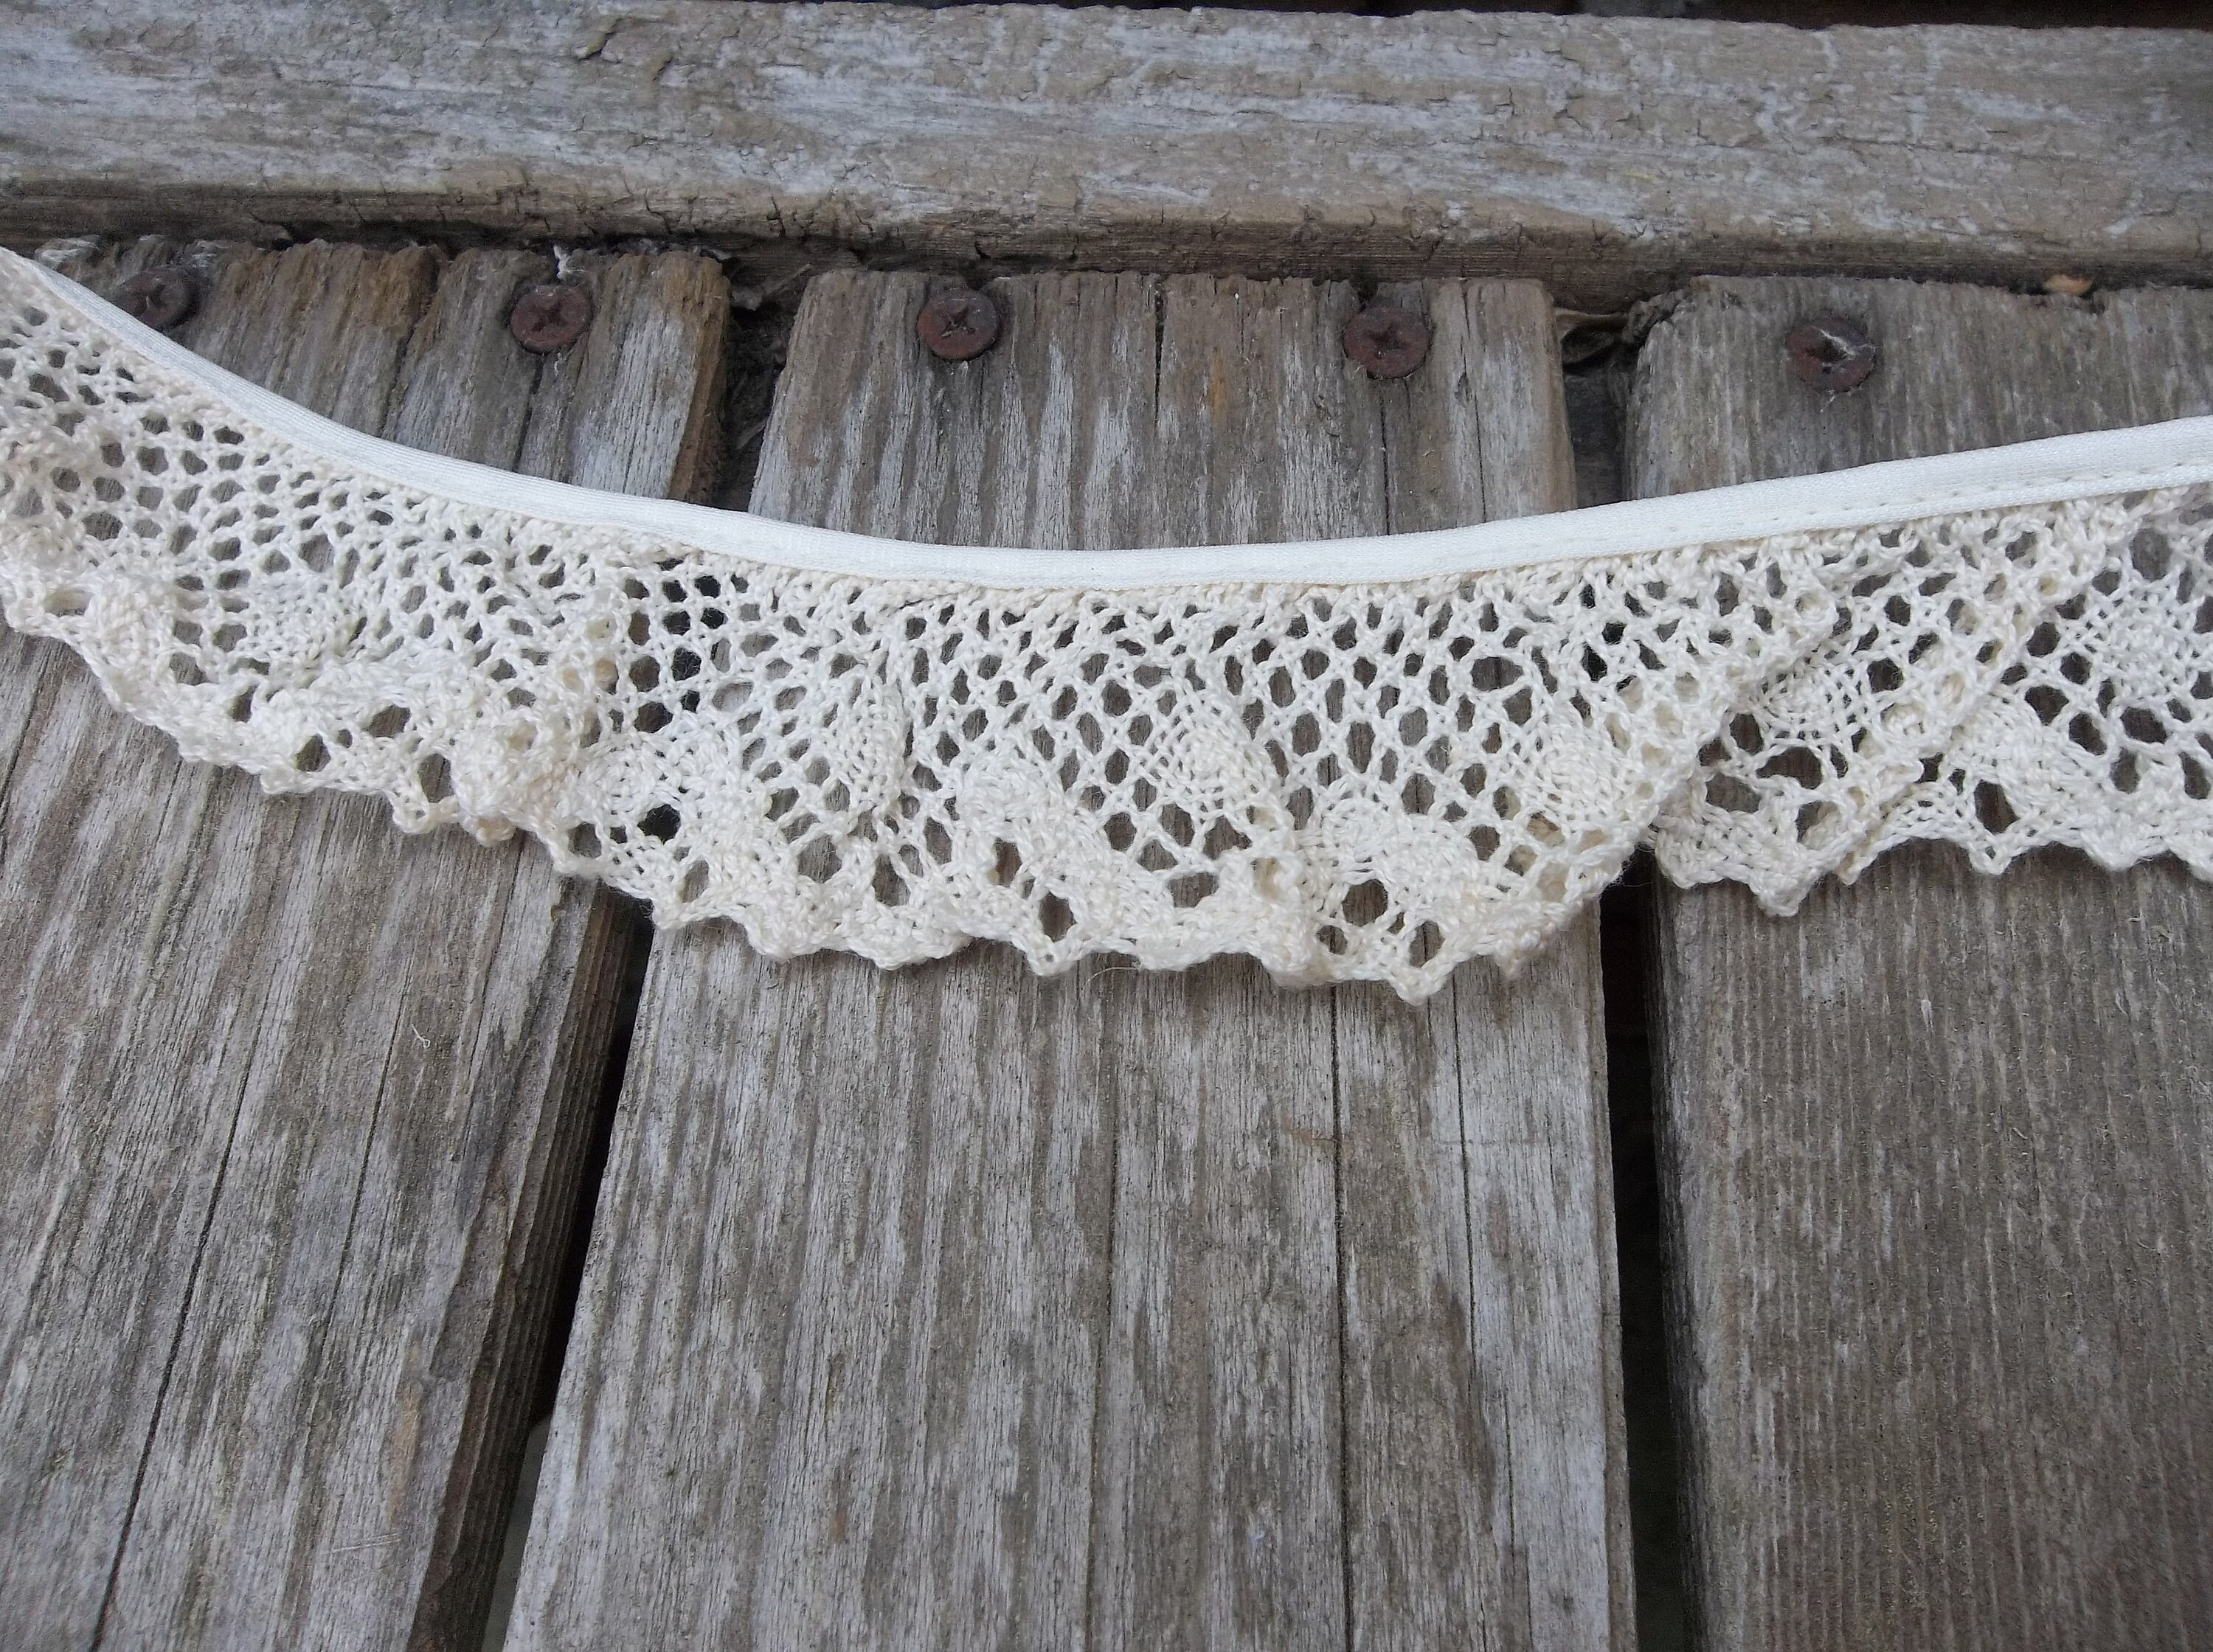 Vintage Cluny Cotton Lace Trim, 1-1/4 Inch by 1 Yard, Natural, off